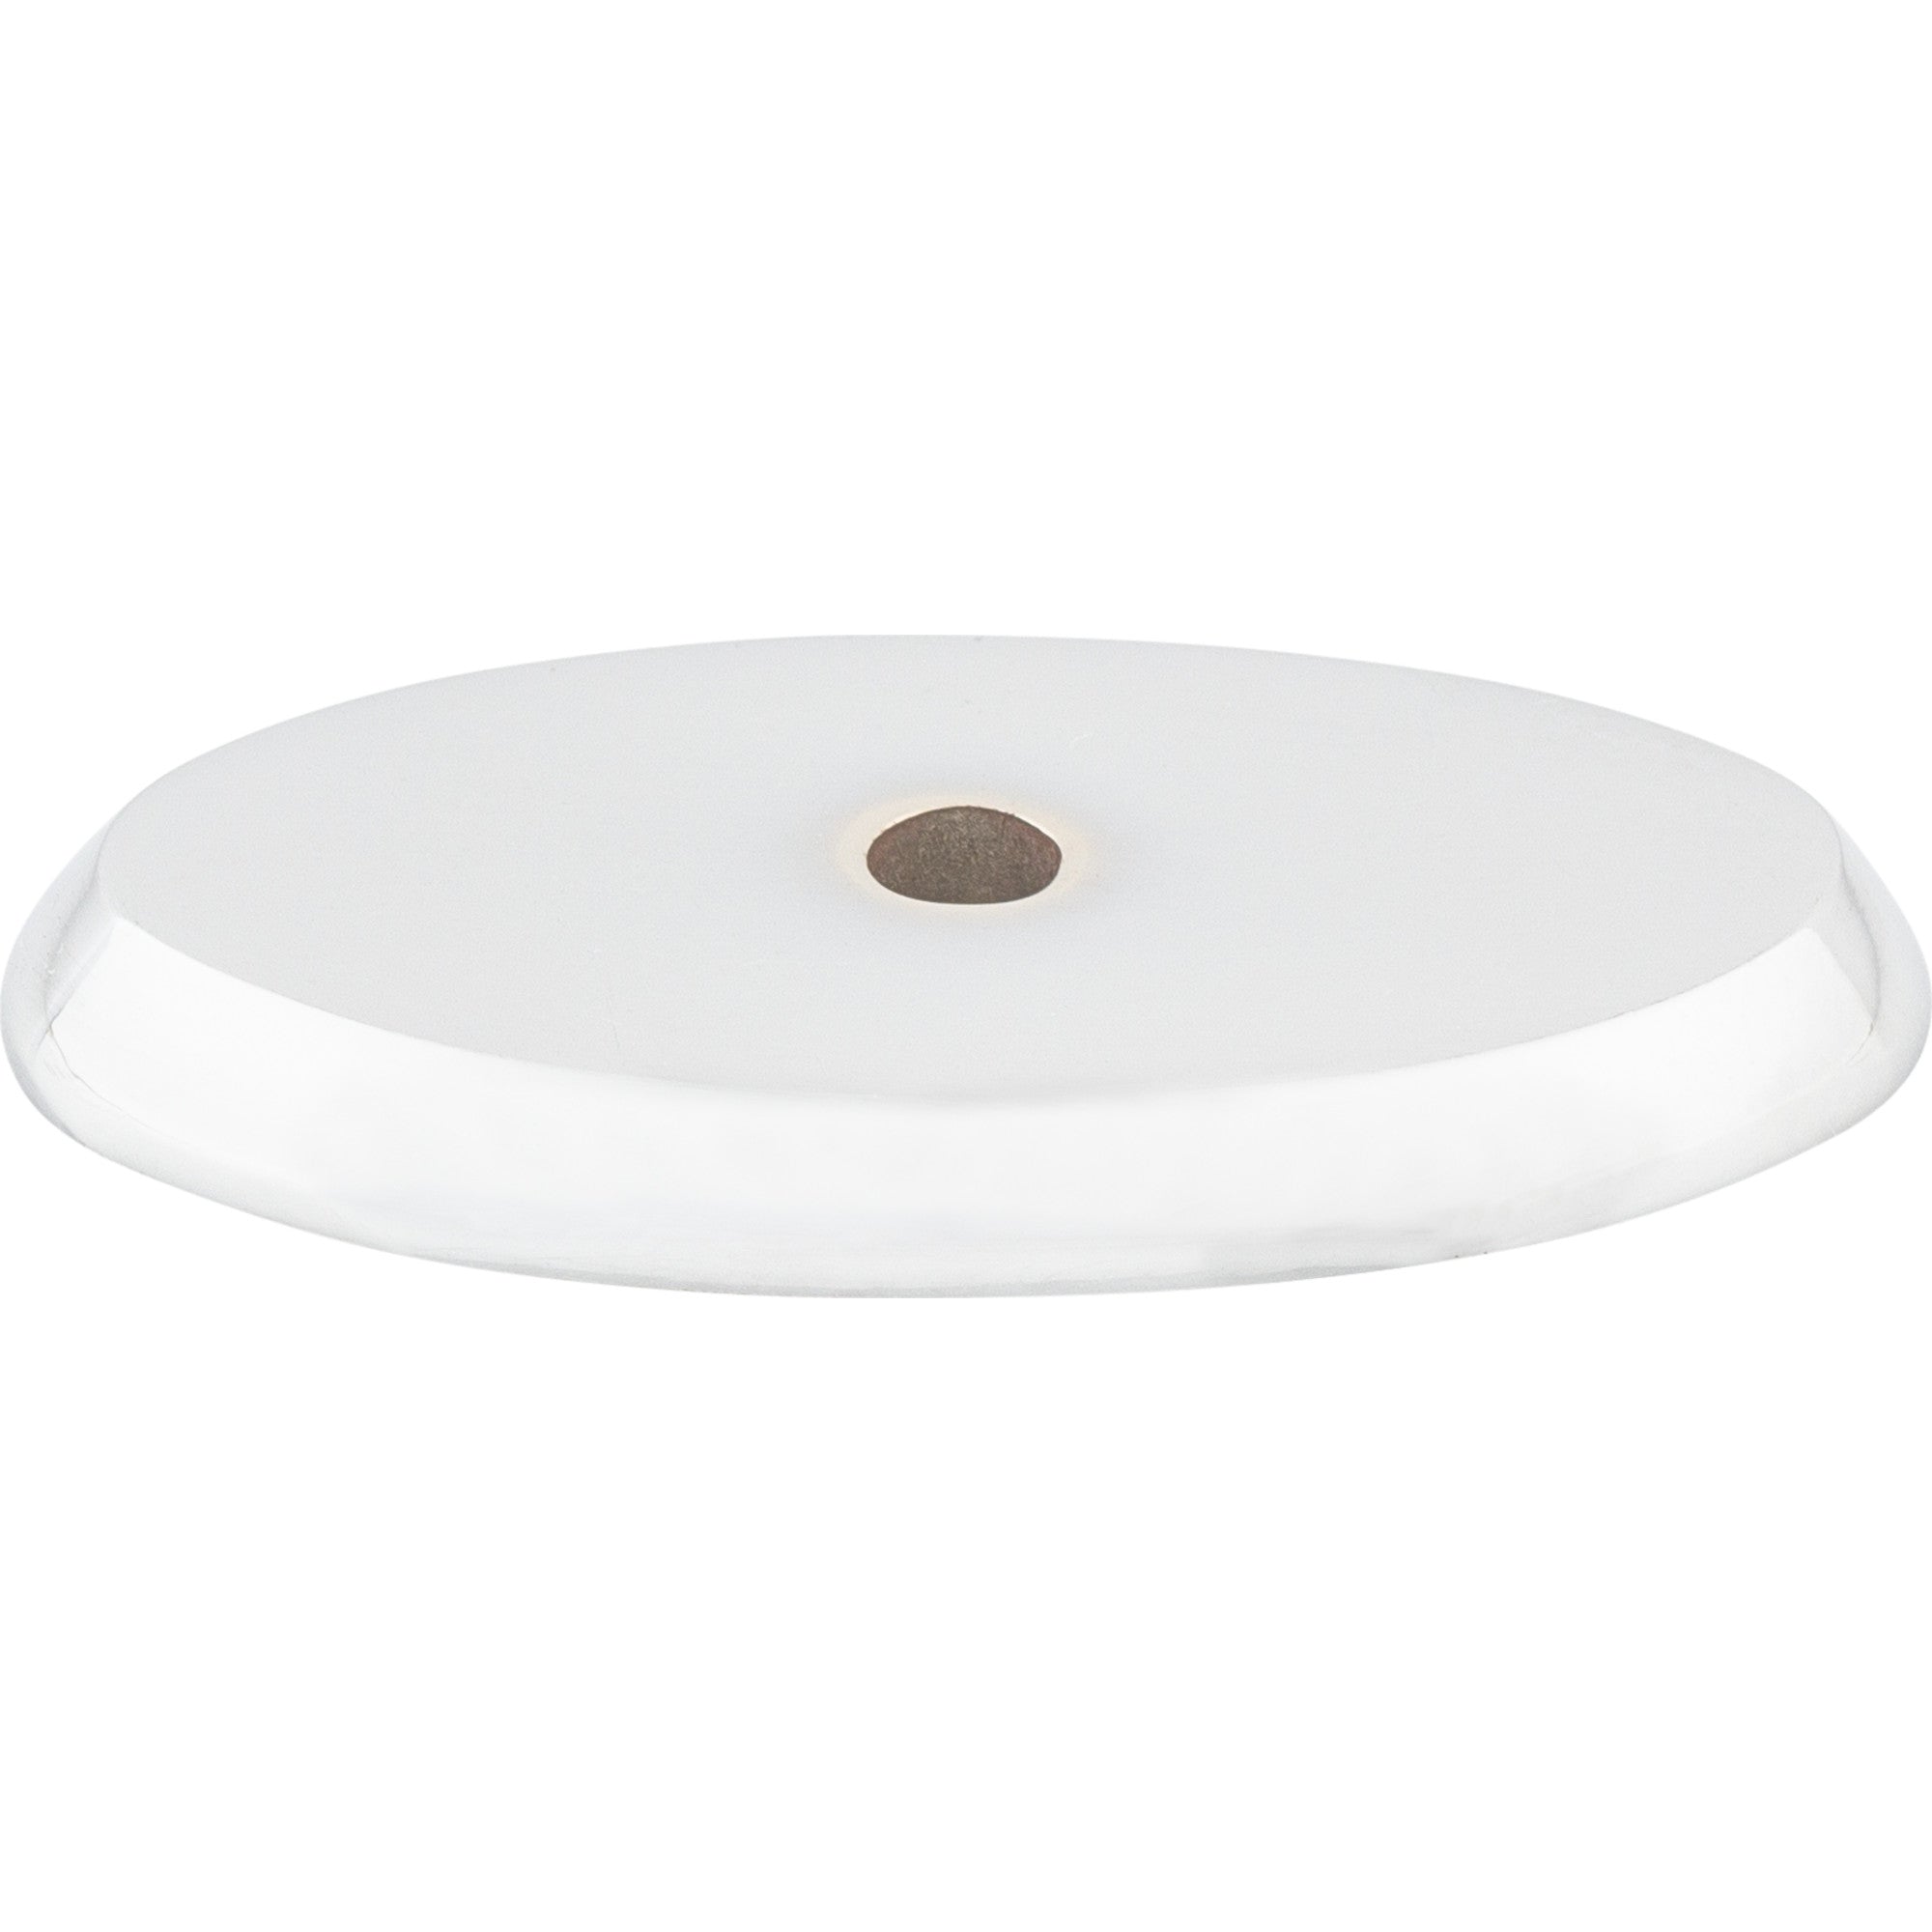 Top Knobs - Hardware - Aspen II Oval Backplate - Polished Nickel - Union Lighting Luminaires Décor